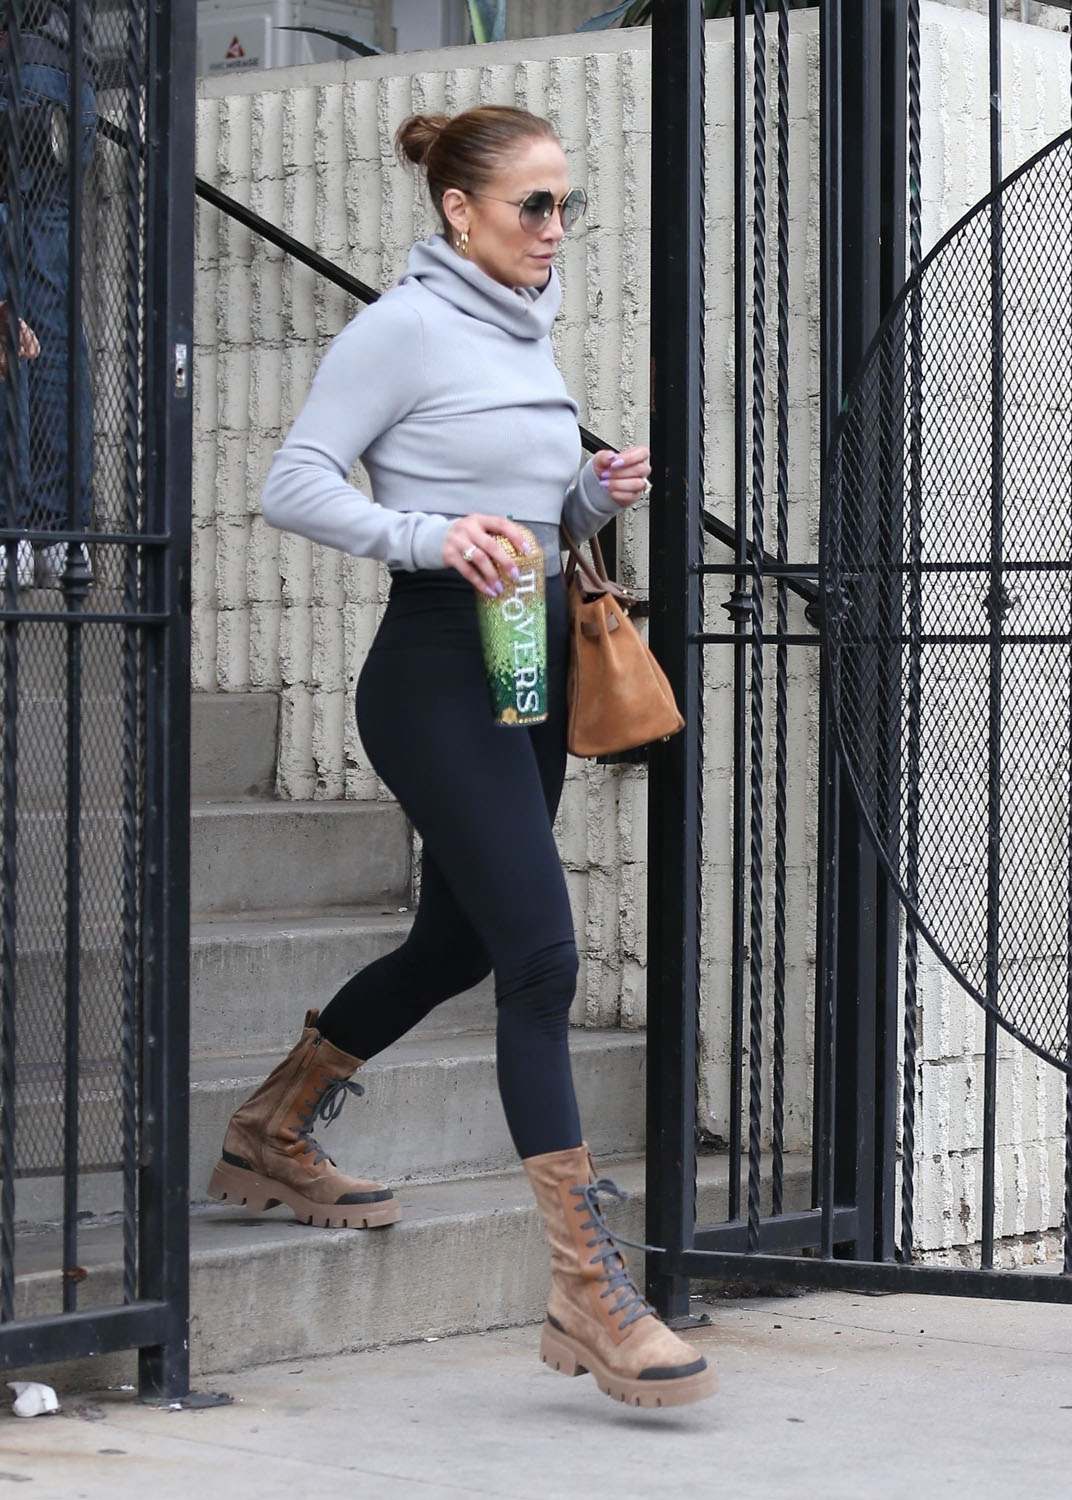 Jennifer Lopez's Rehearsal Outfit Includes Leggings and a Birkin